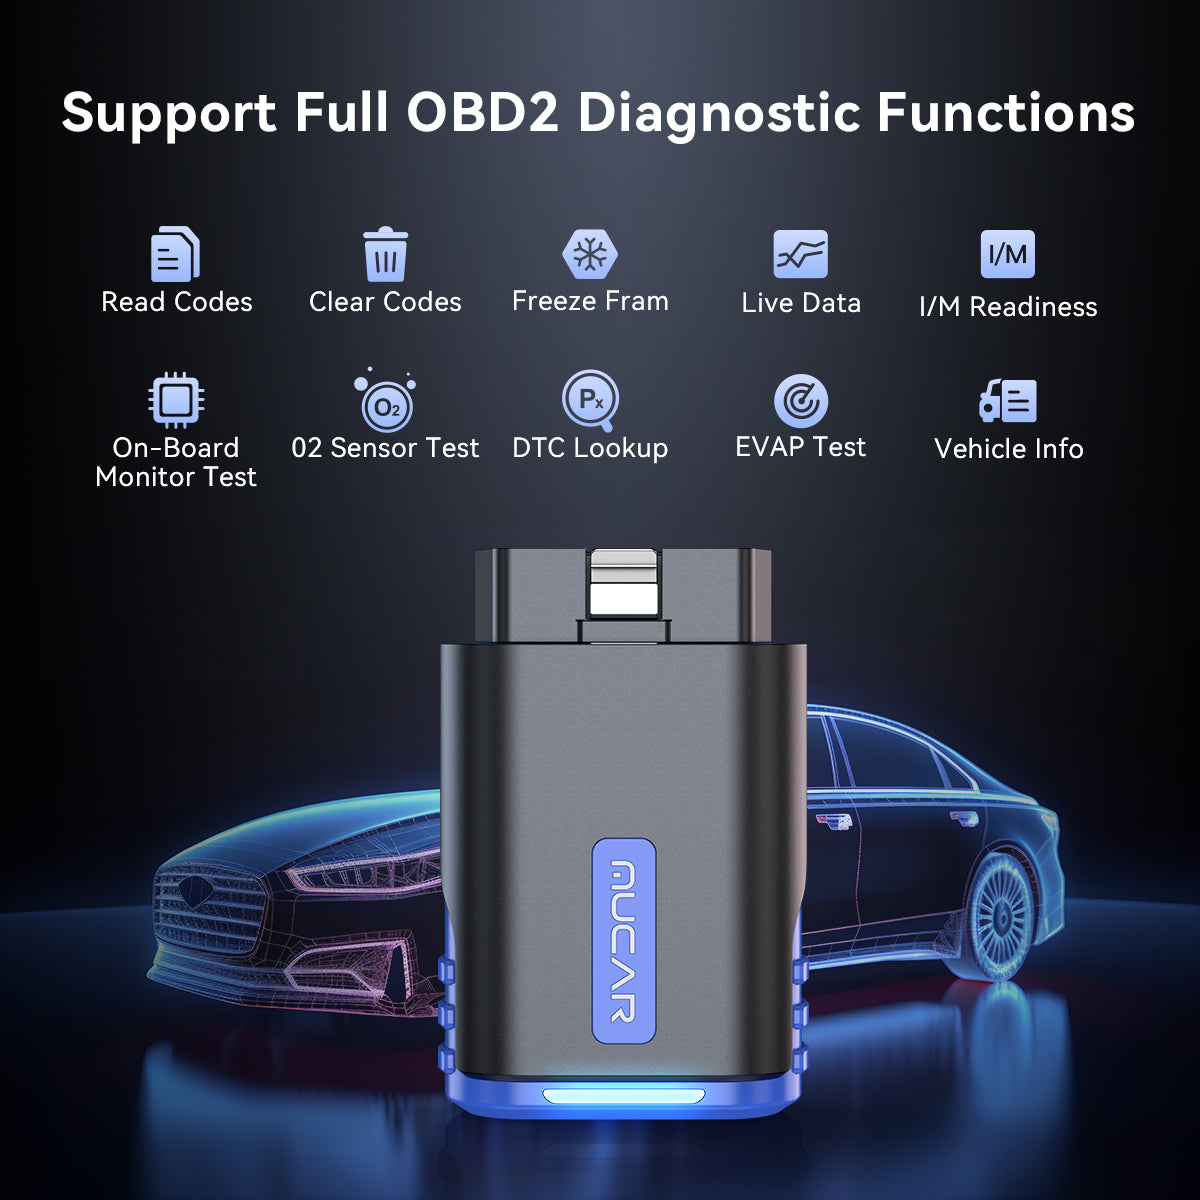 DriverScan SUPPORT FULL OBD2 DIAGNOSTIC FUNCTIONS